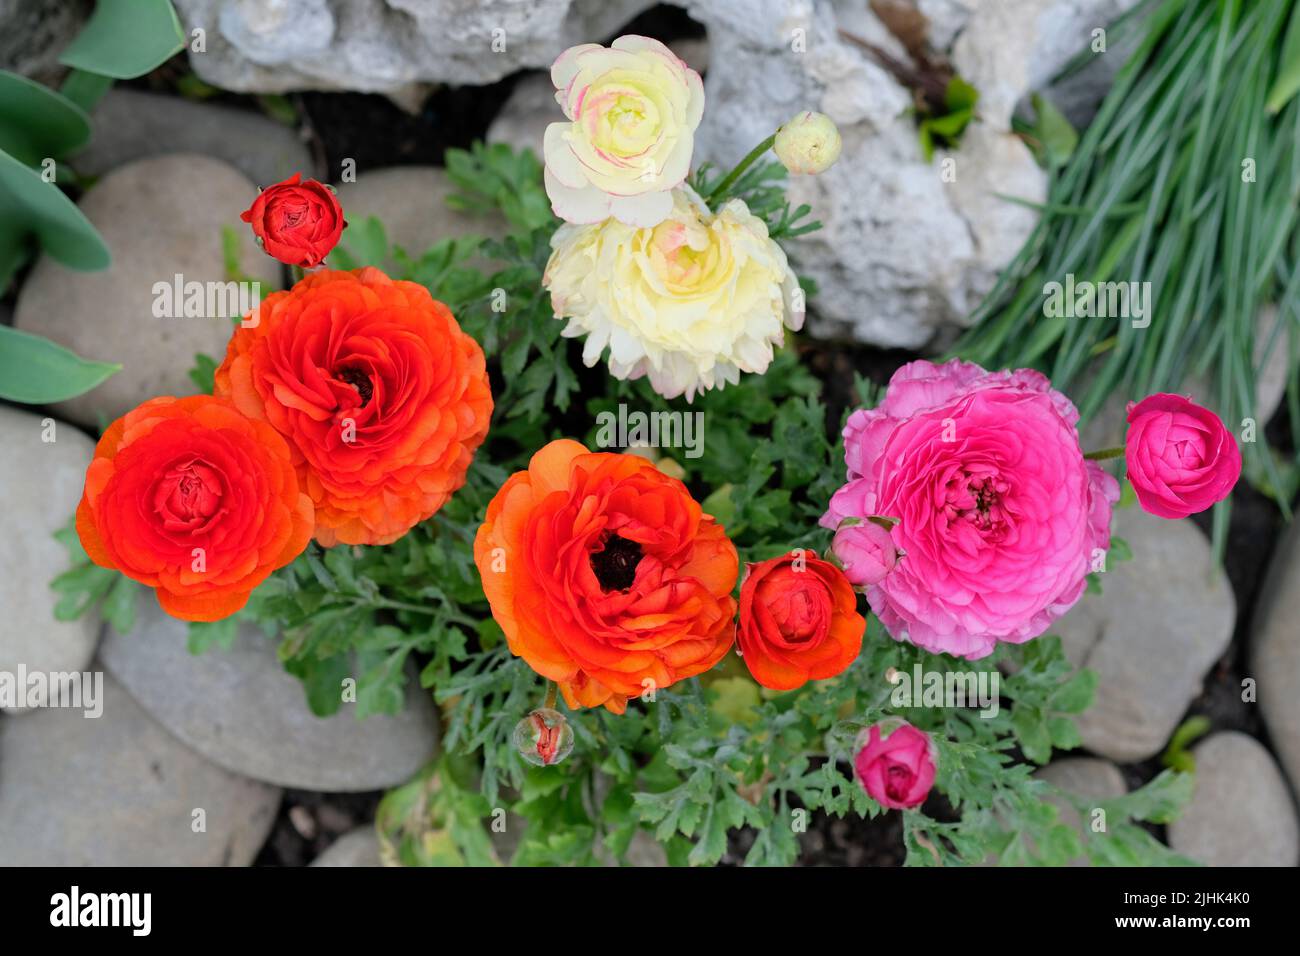 Ranunculus ( crowfoot) top view in landscape design. Colorful Asian buttercup flowers and juniper twigs for flower beds. Red and pink Buttercup, Ranun Stock Photo